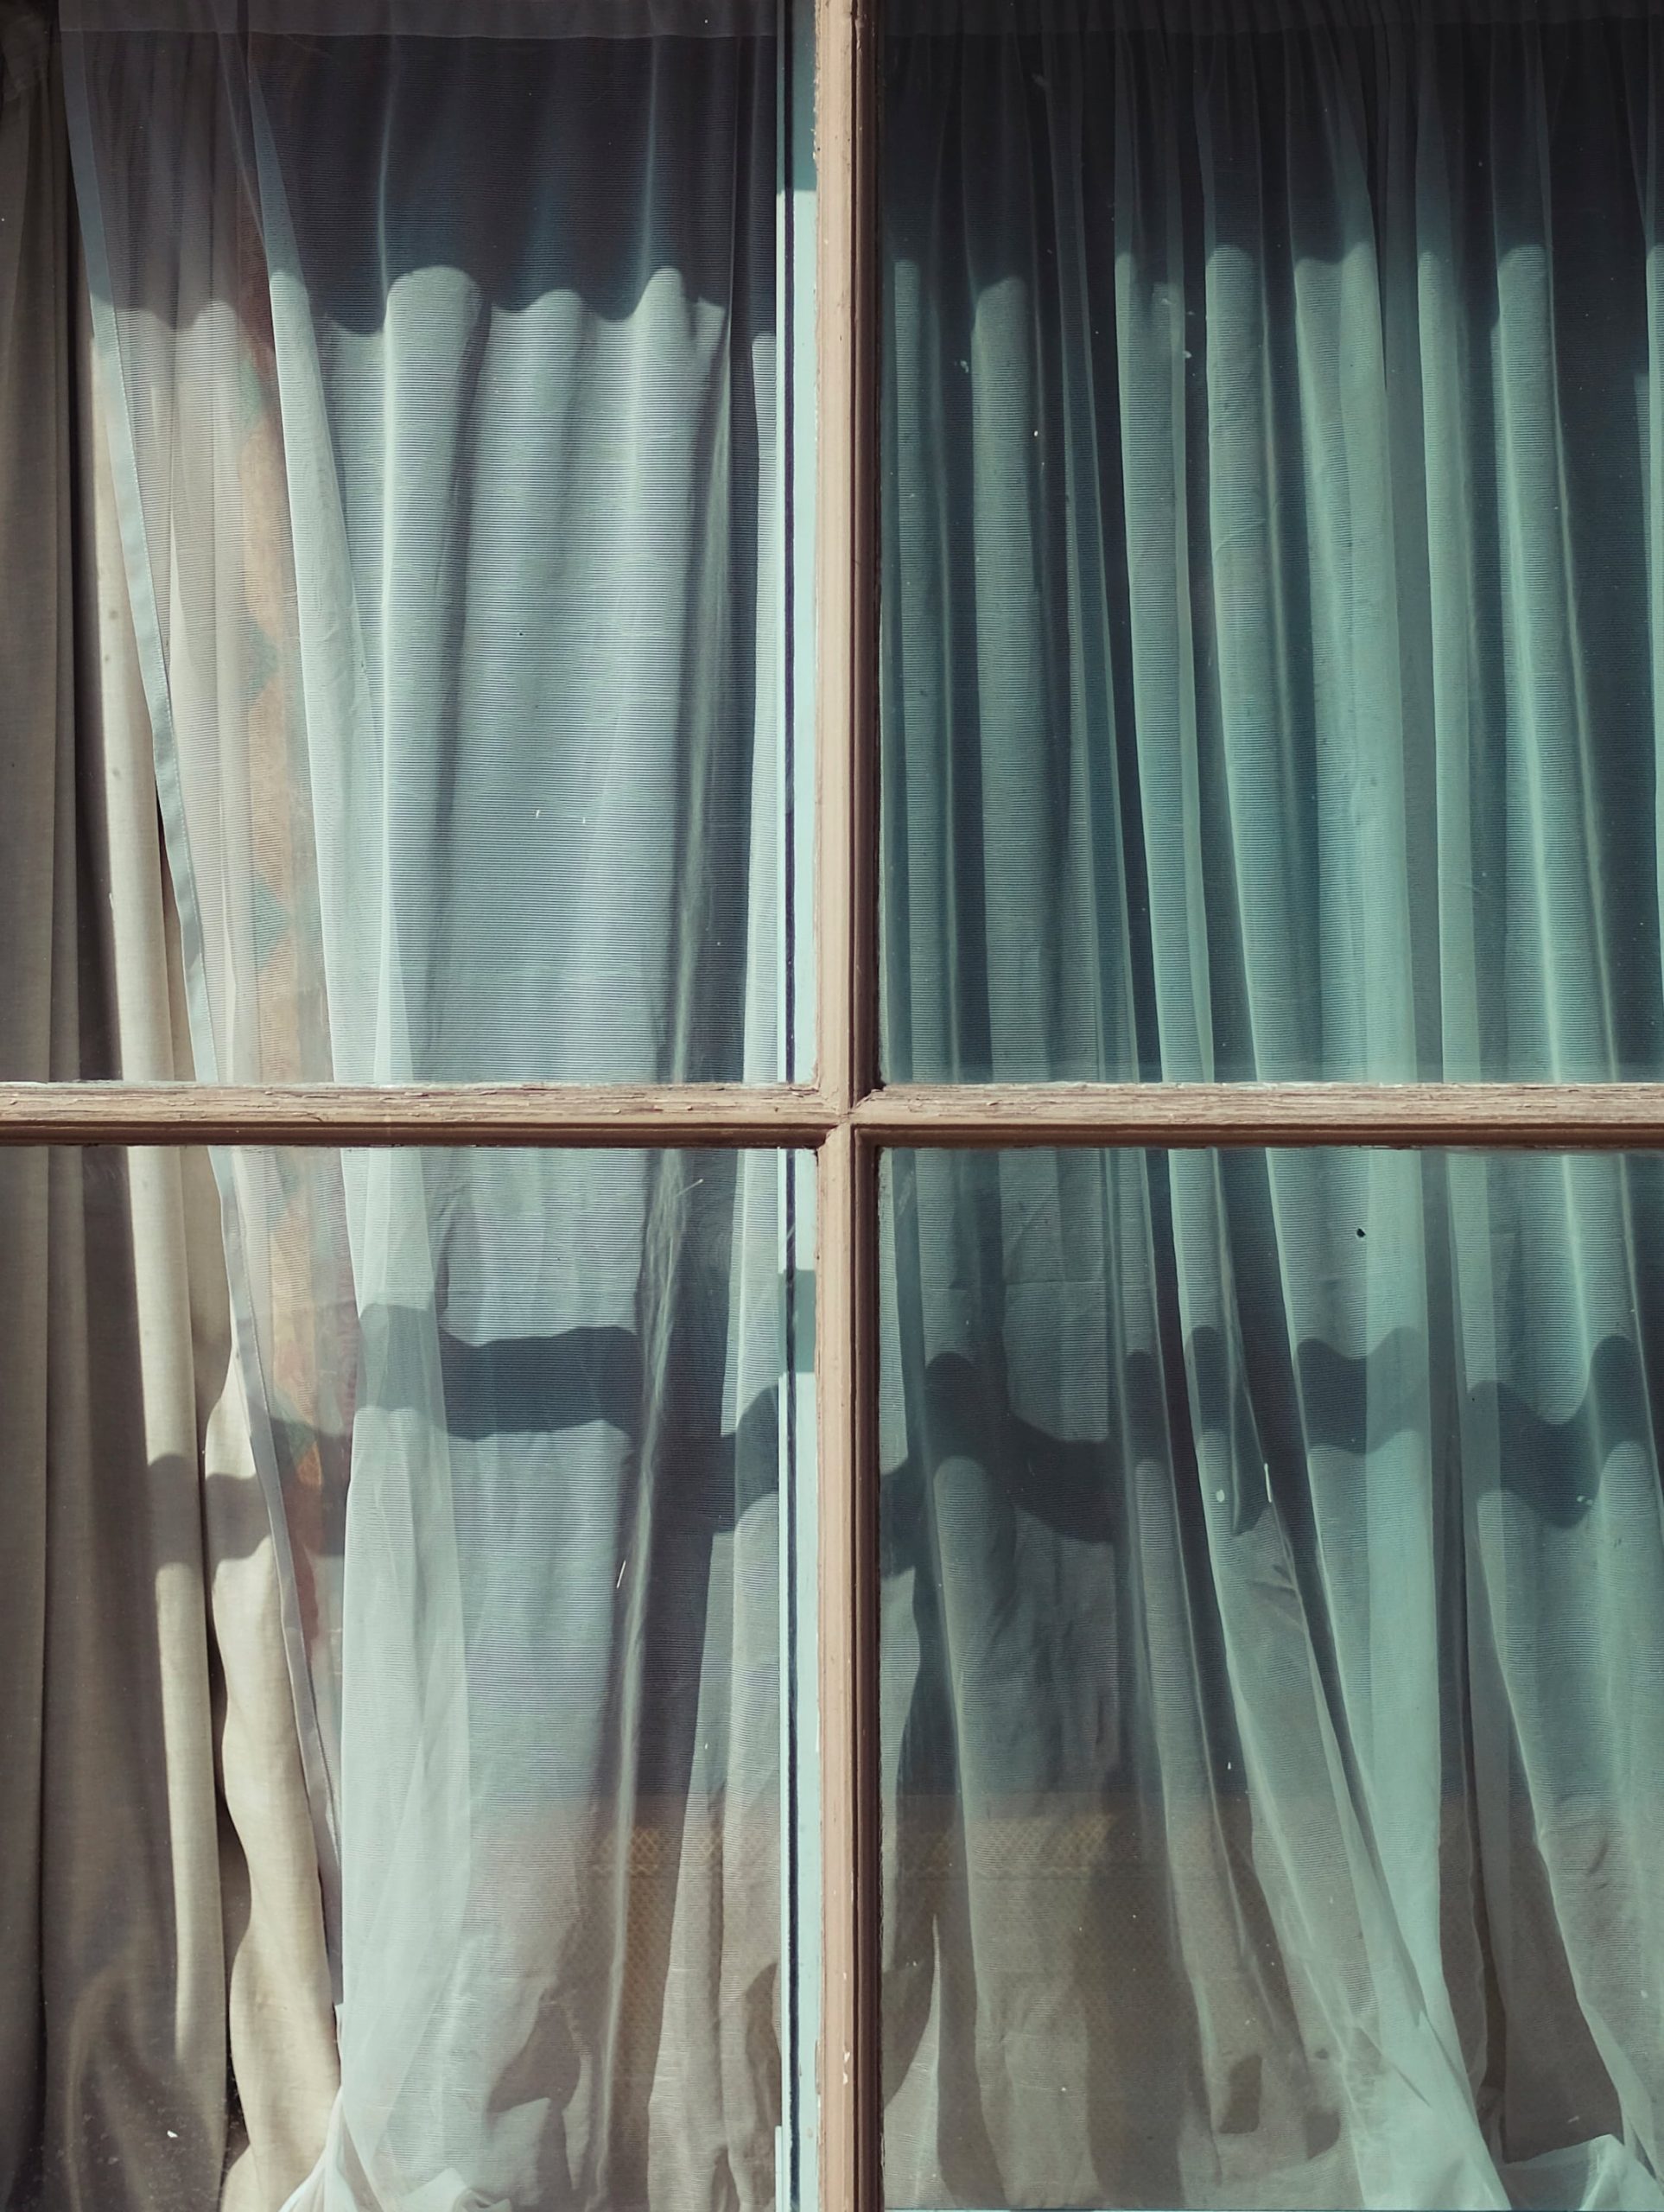 Curtains on a window